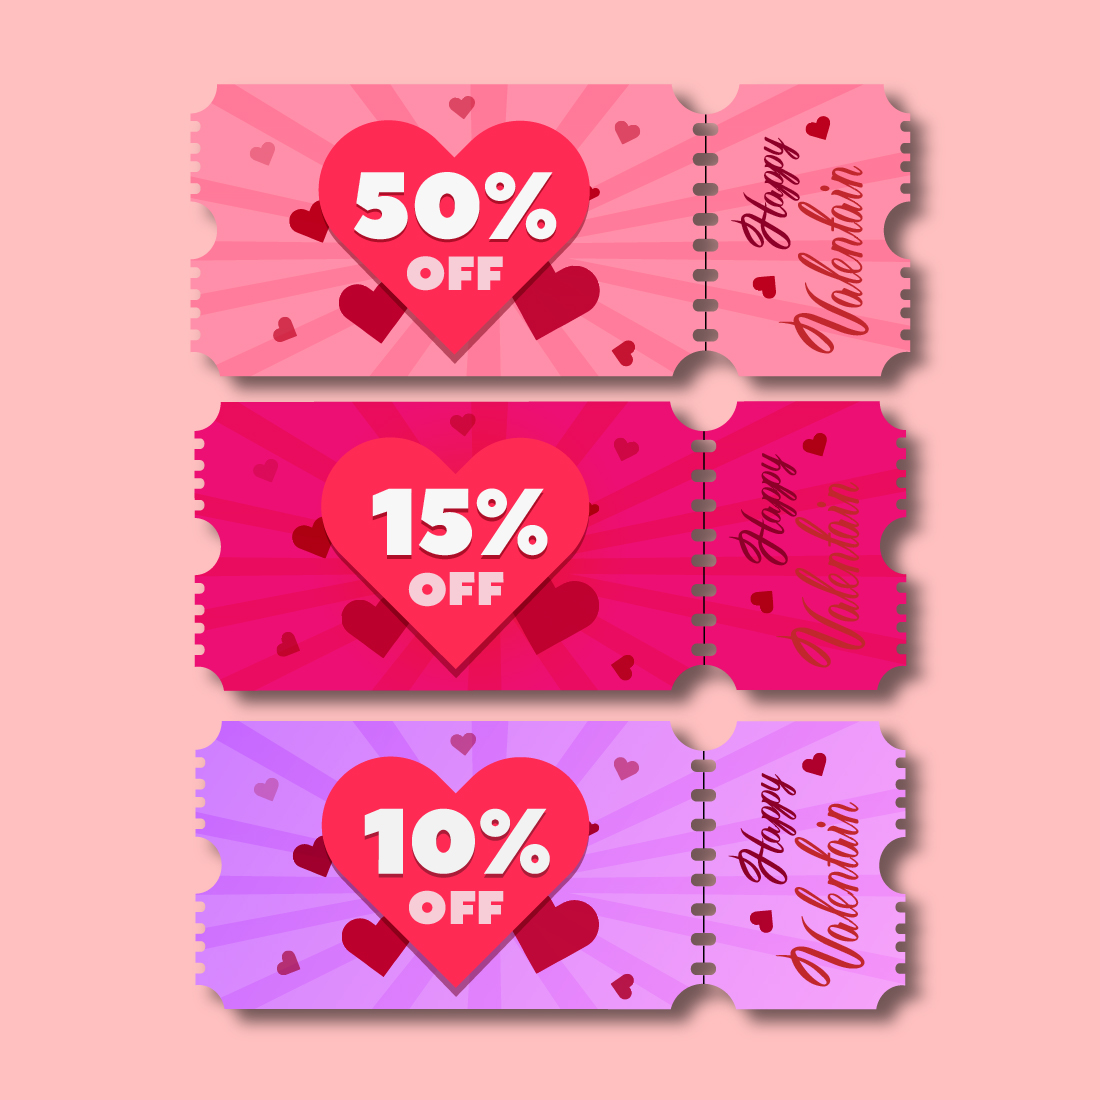 Valentine's Day Discount Coupons cover image.